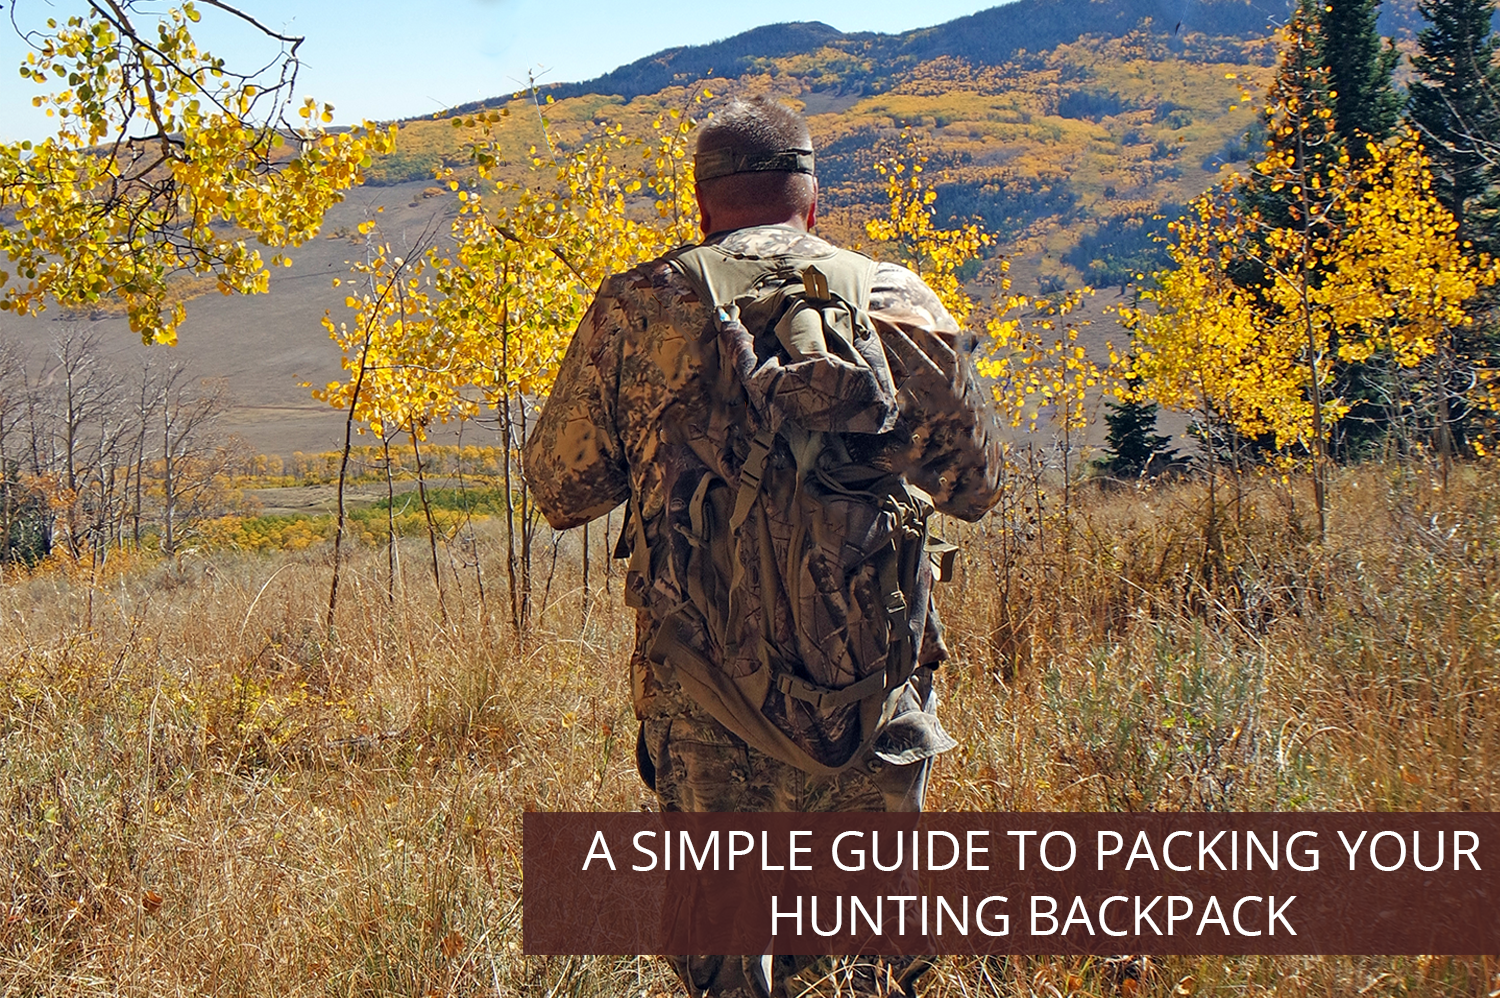 Anonymous man with back turned to camera, showing off hunting backpack.